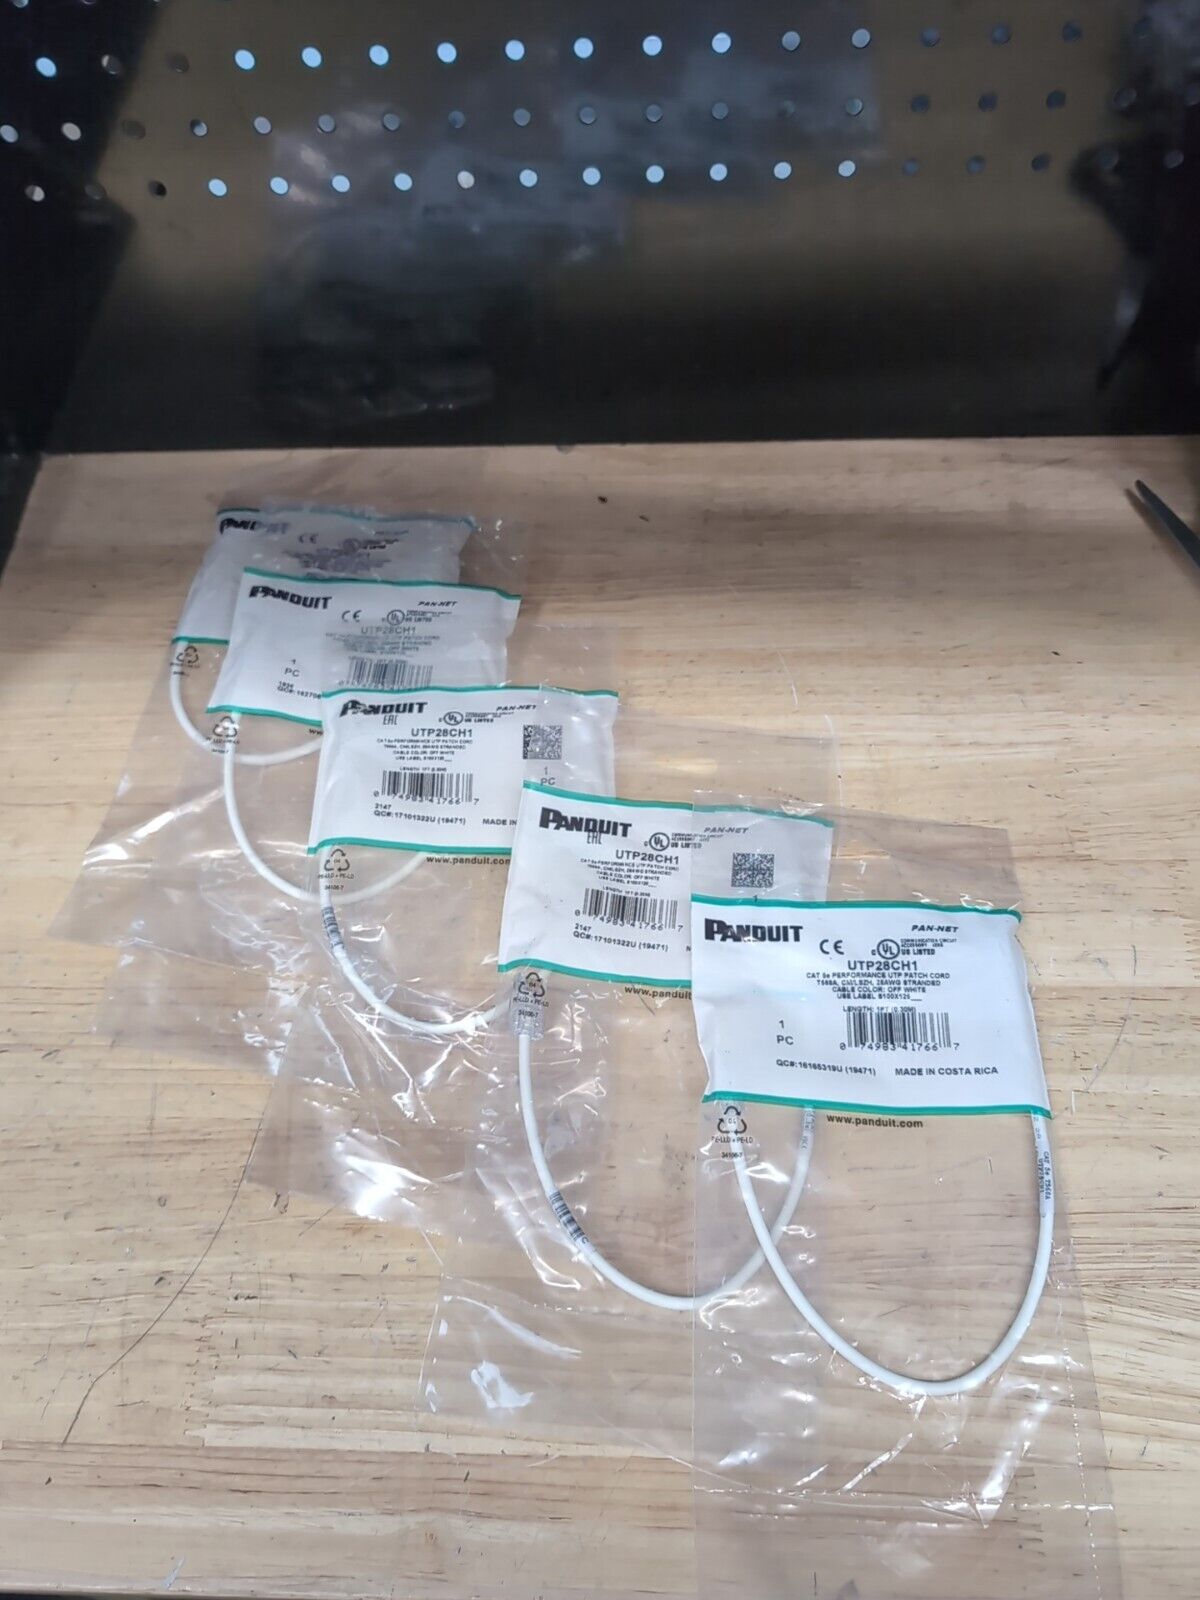 Lot of 5 New NOS Panduit Pan-Net CAT 5e Performance UTP Patch Cord 1ft Cable R1